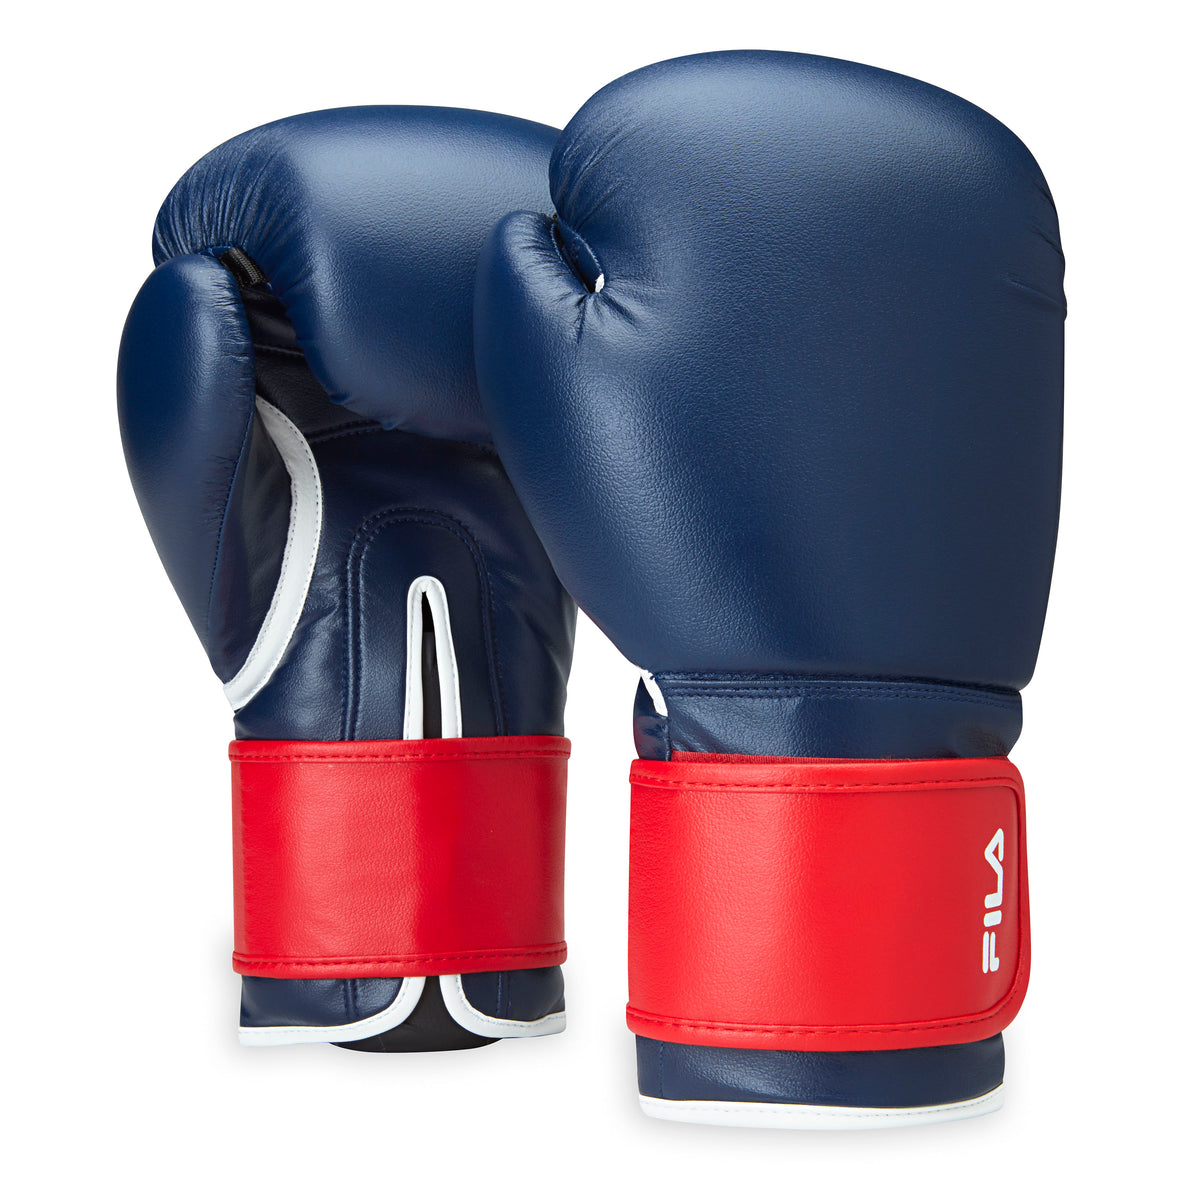 FILA Boxing Gloves (10oz) Navy/Red both gloves front and back